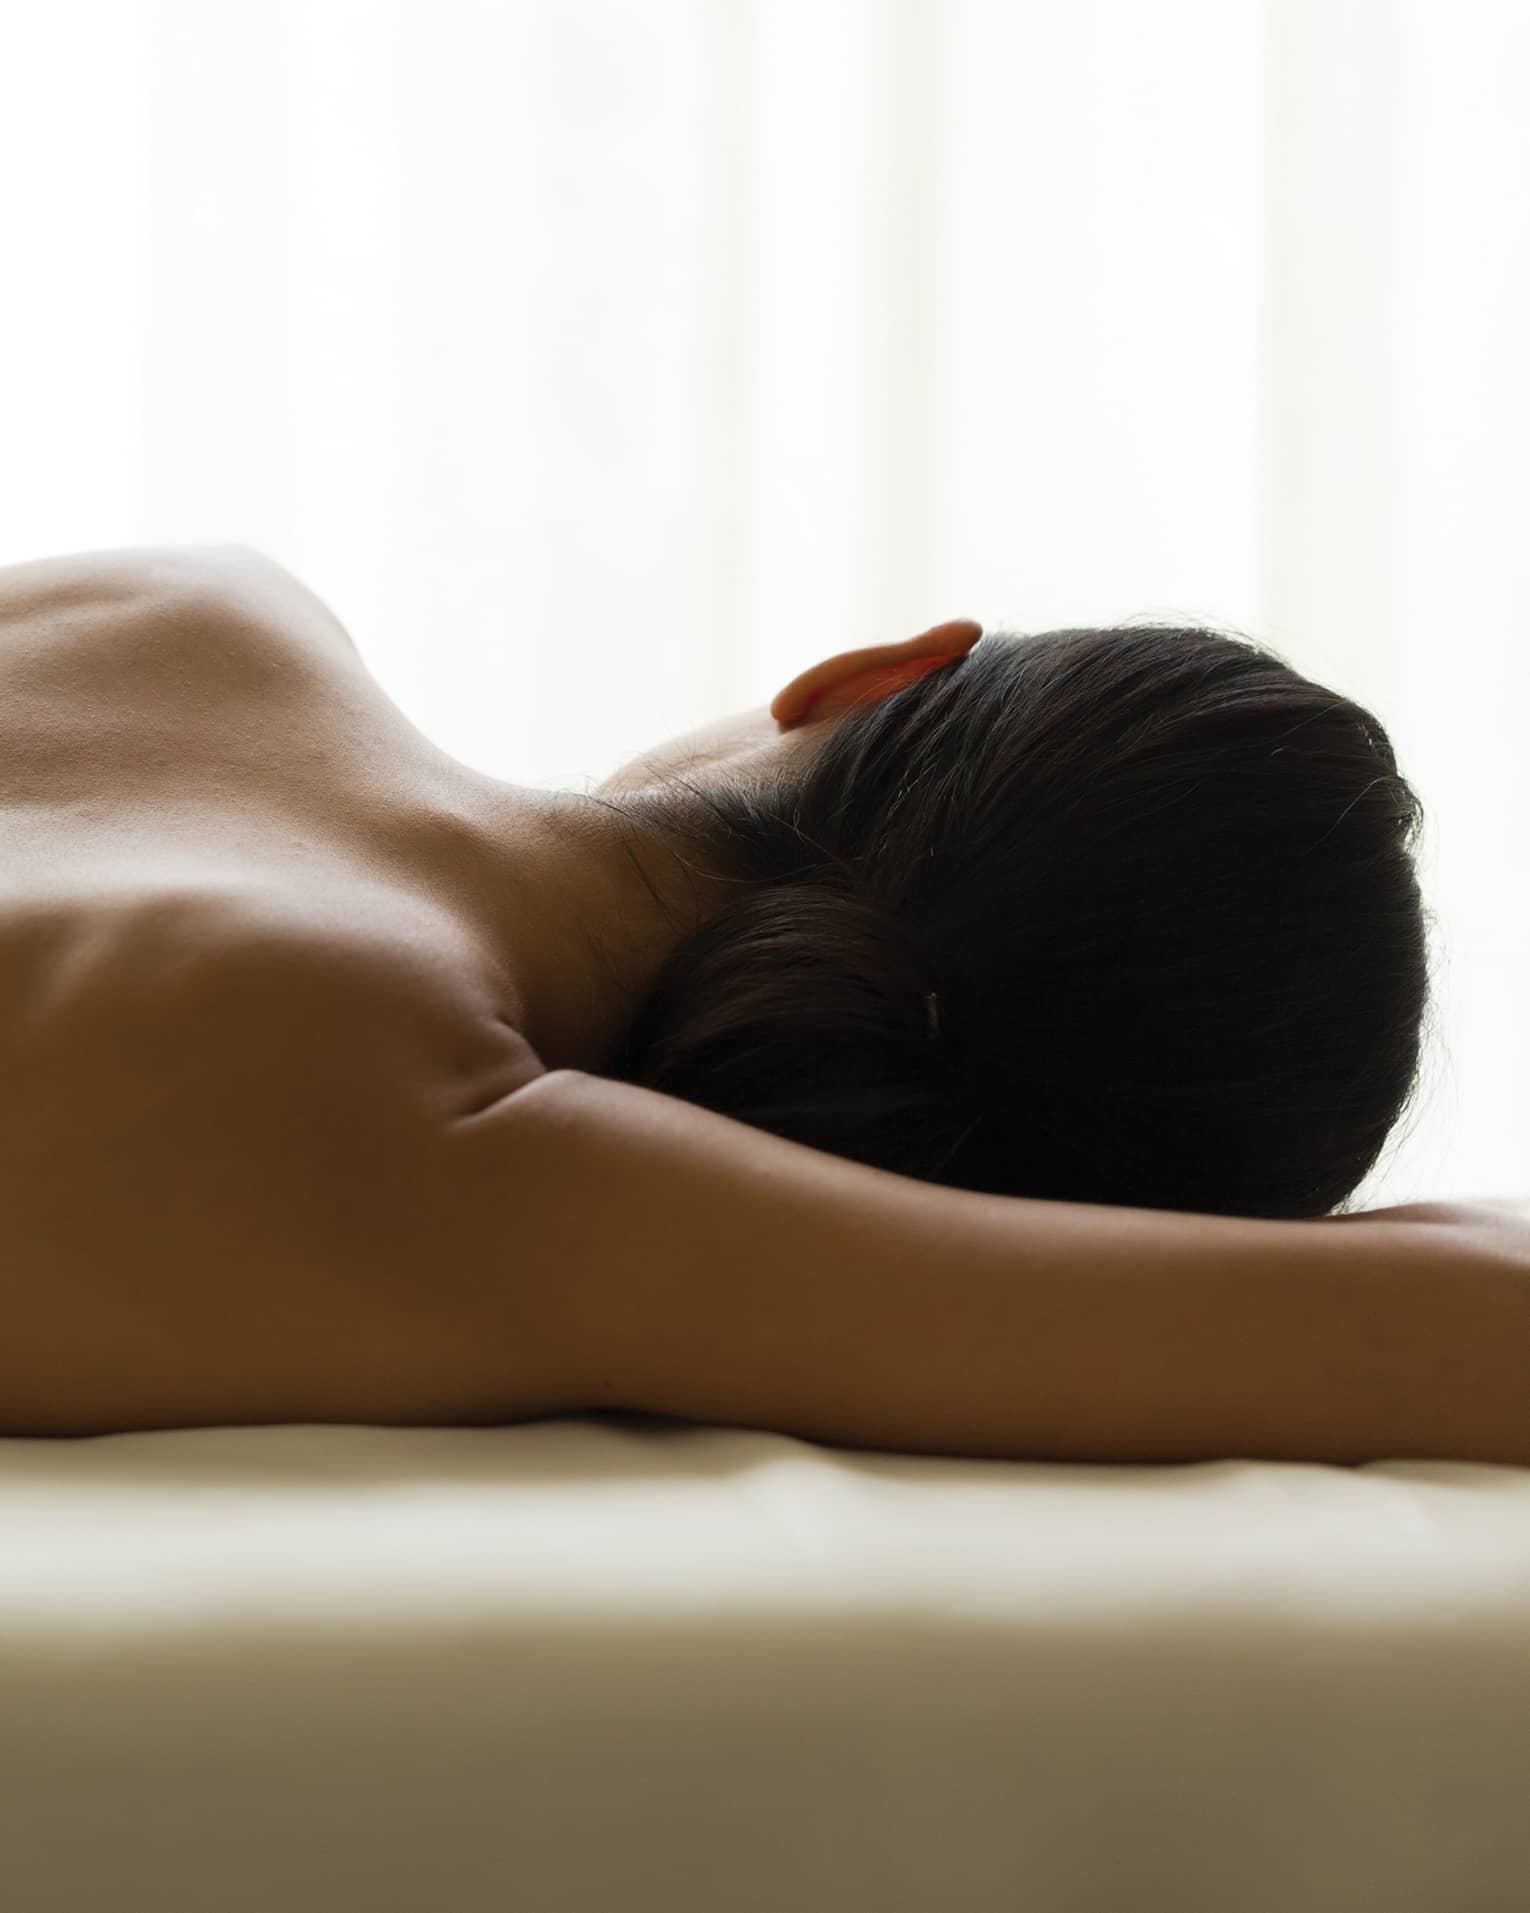 Woman's bare back as she lays on massage table under window, white curtains